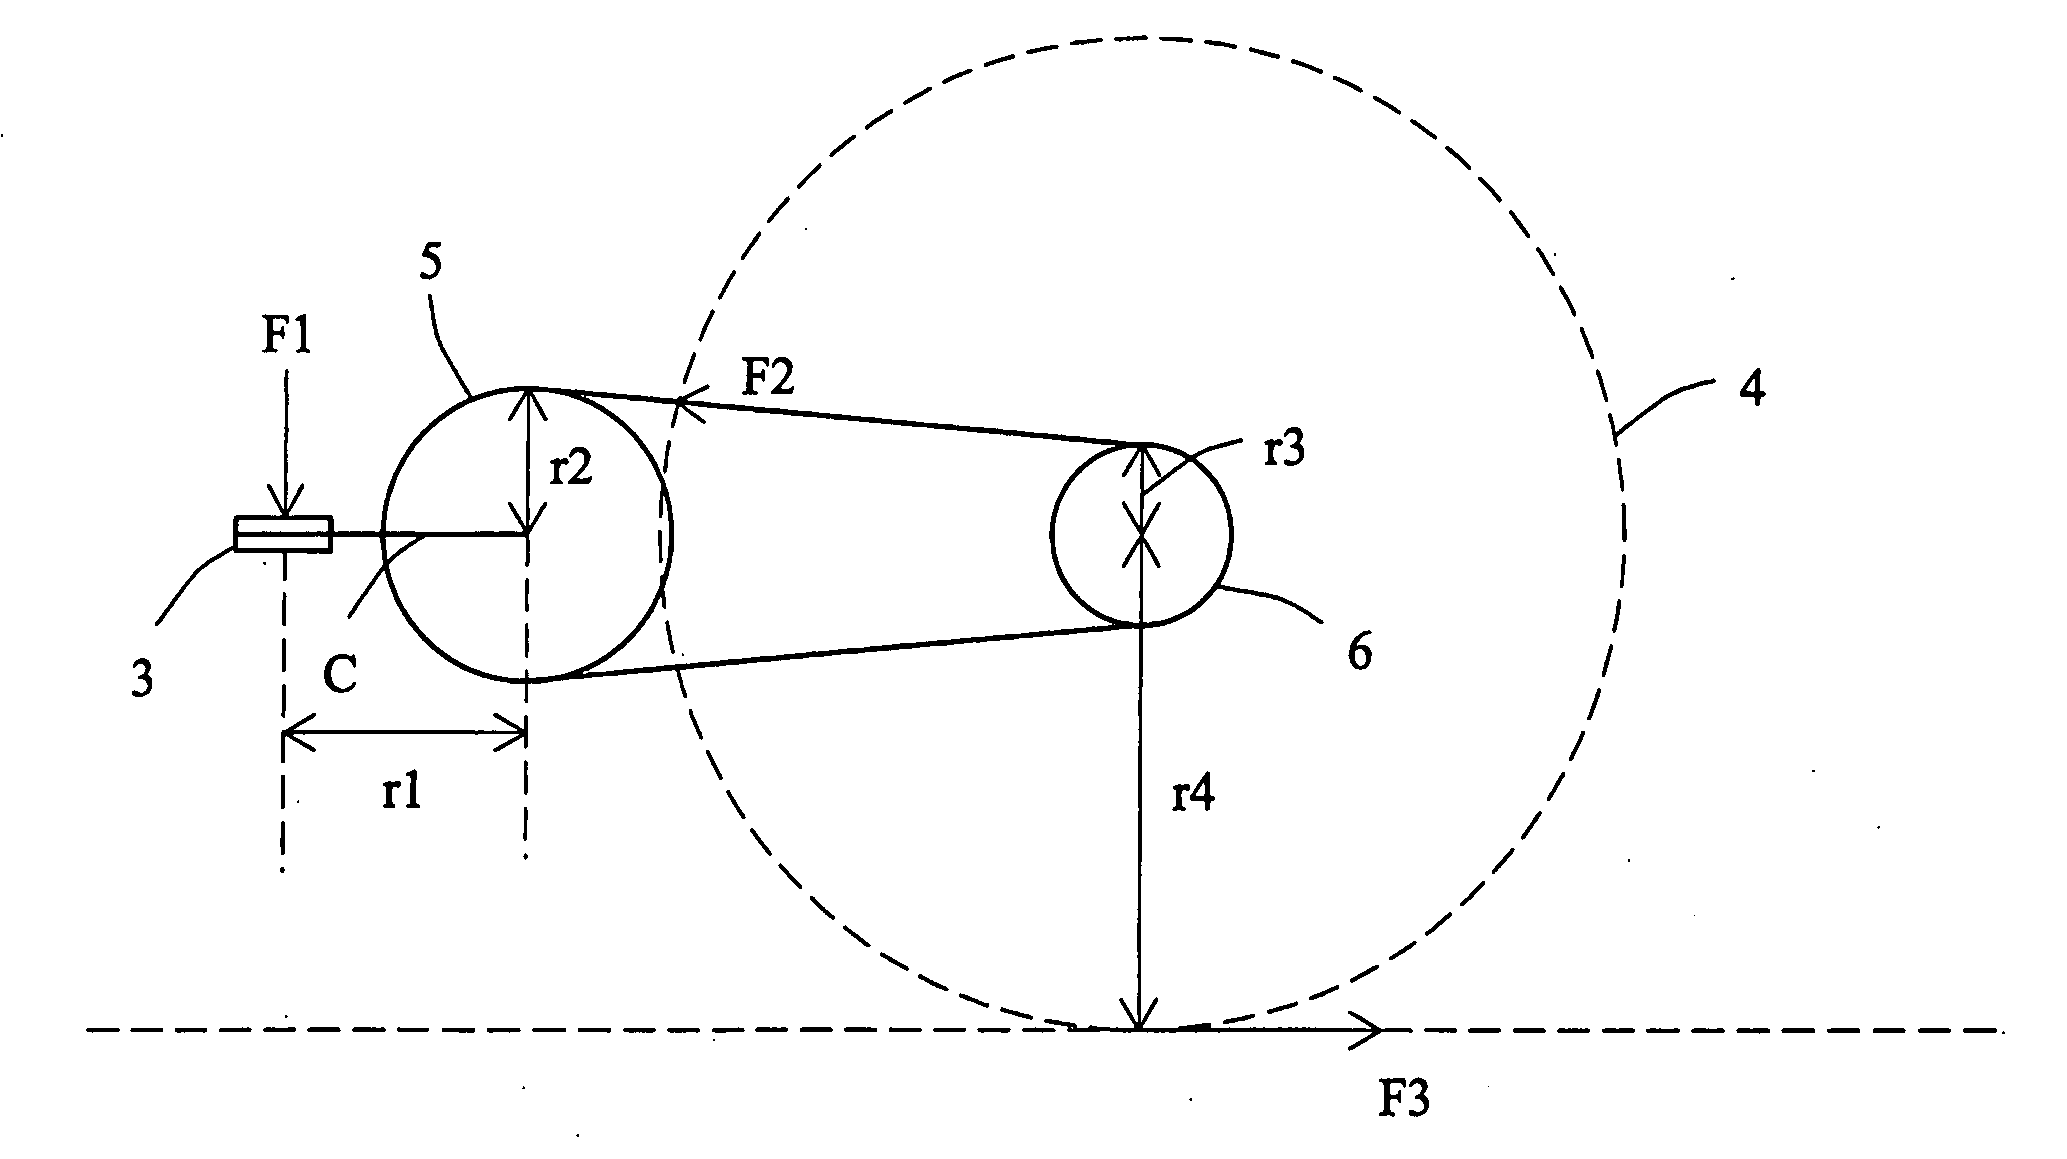 Pedaling correction device for bicycle